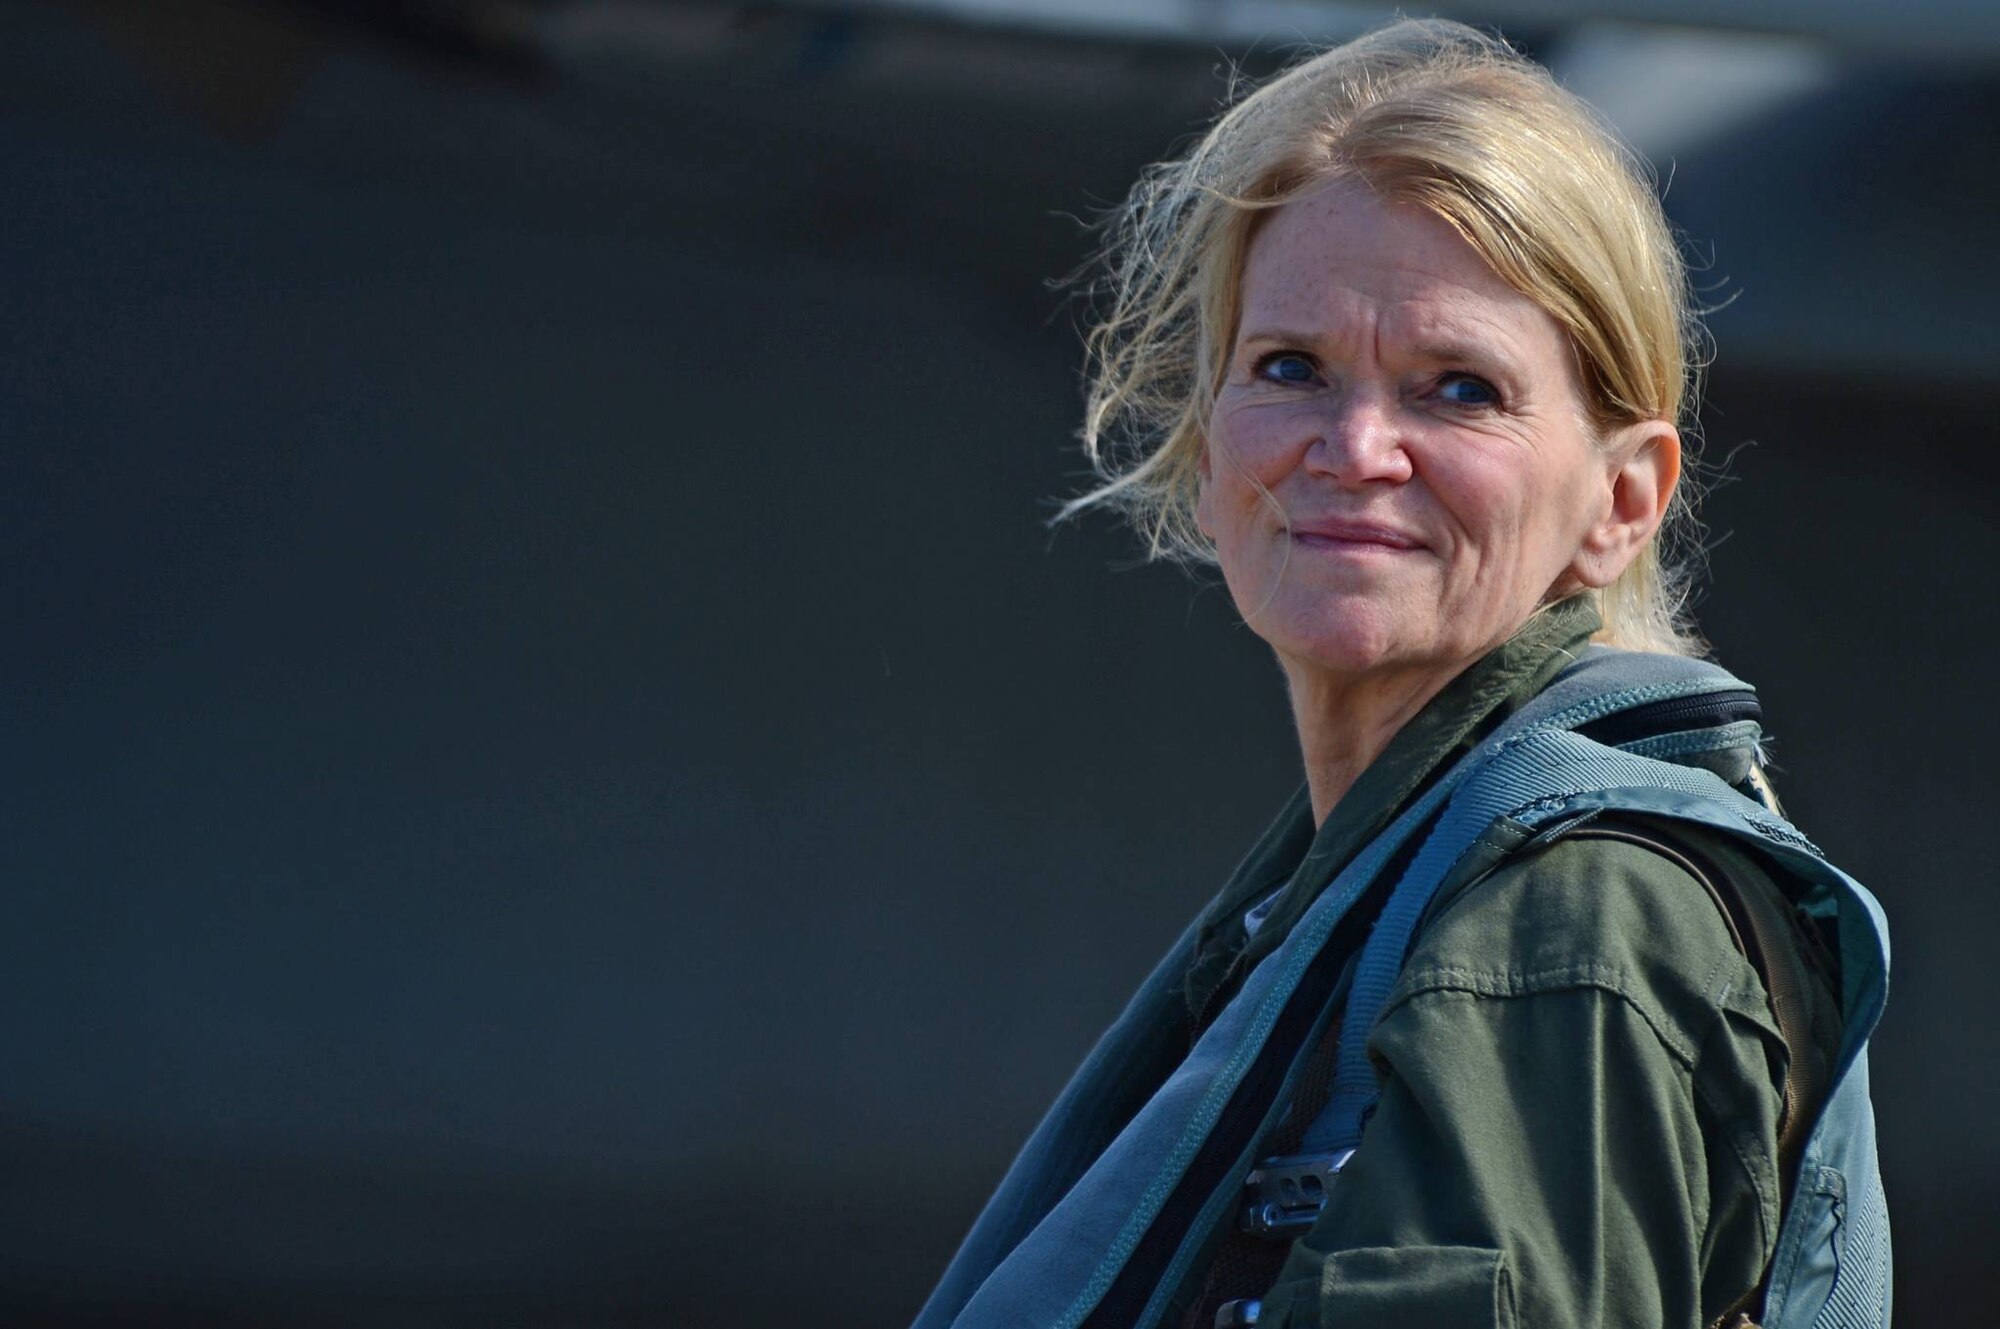 Martha Raddatz, ABC News chief global affairs correspondent, prepares for a familiarization flight in a 493rd Fighter Squadron F-15D Eagle at Ämari Air Base, Estonia, Aug. 24, 2016. Raddatz flew alongside the 493rd FS and 194th EFS to become familiar with the aircraft’s capabilities during the squadron’s multilateral flying training deployment. (U.S. Air Force photo by Senior Airman Erin Trower/Released)